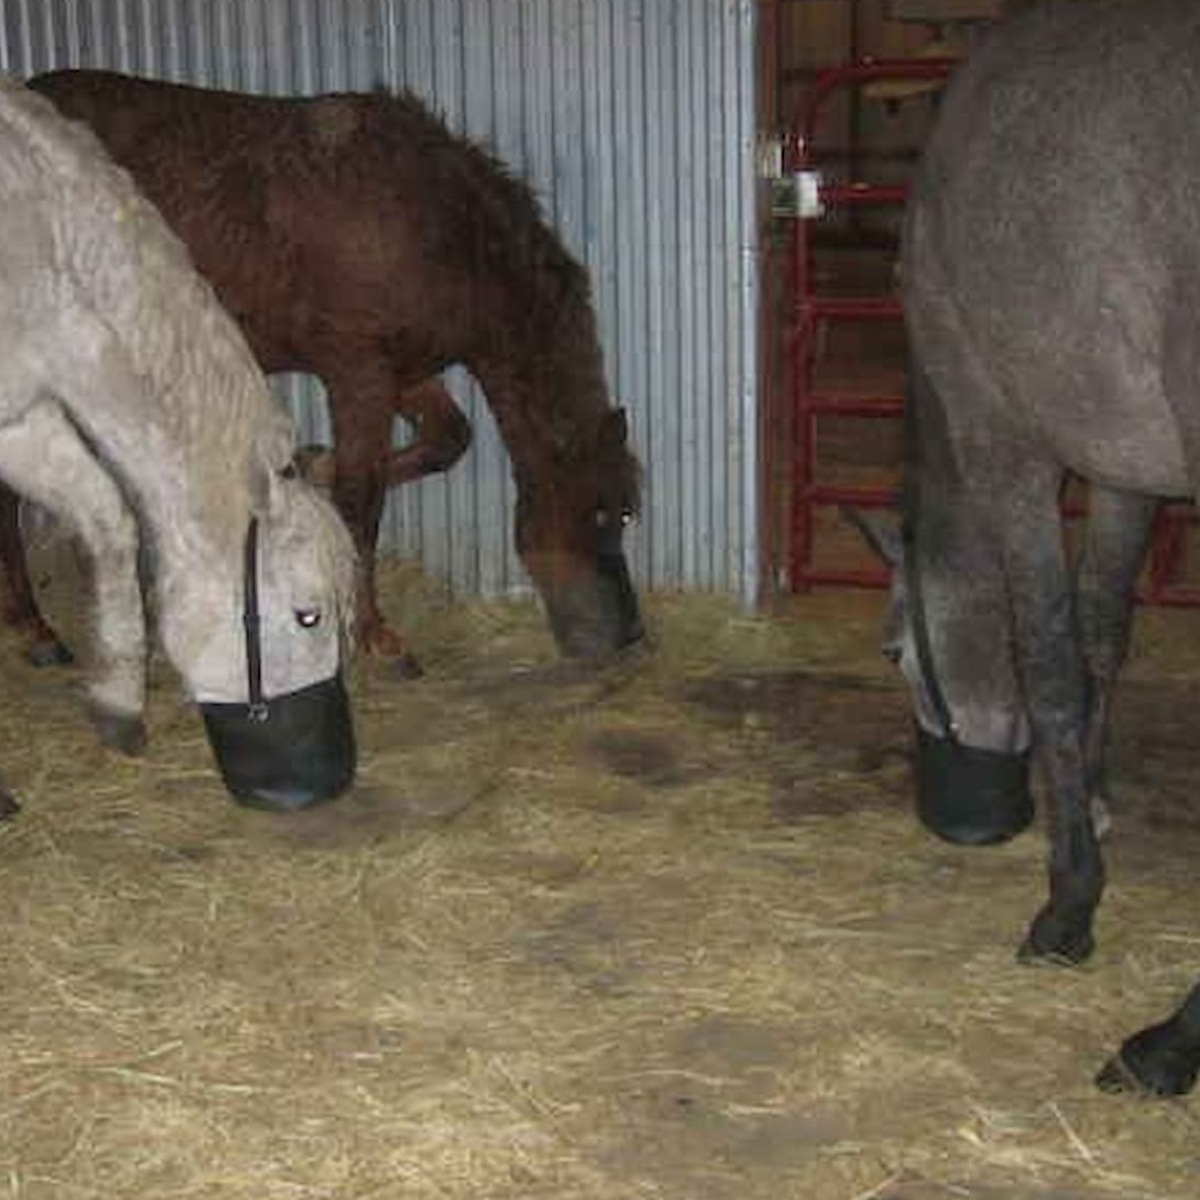 A group of 3 horses eating from feed bags in a shared horse stall.